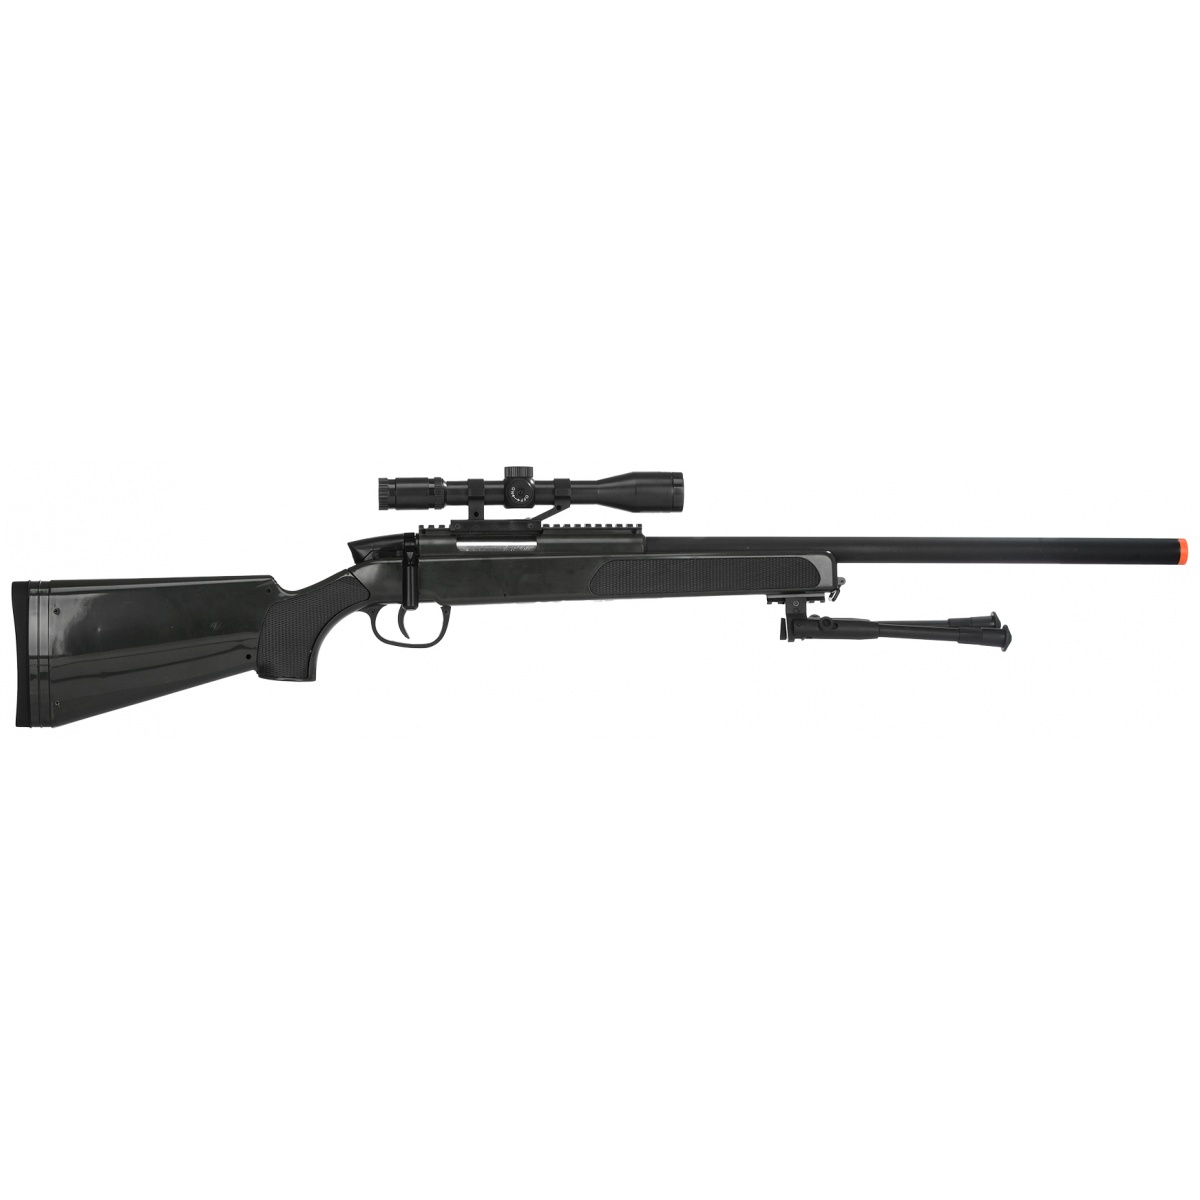  420 FPS Durable Polymer MK51 Bolt Action Airsoft Sniper Rifle  Full Metal Bolt w/Scope (Black) : Sports & Outdoors